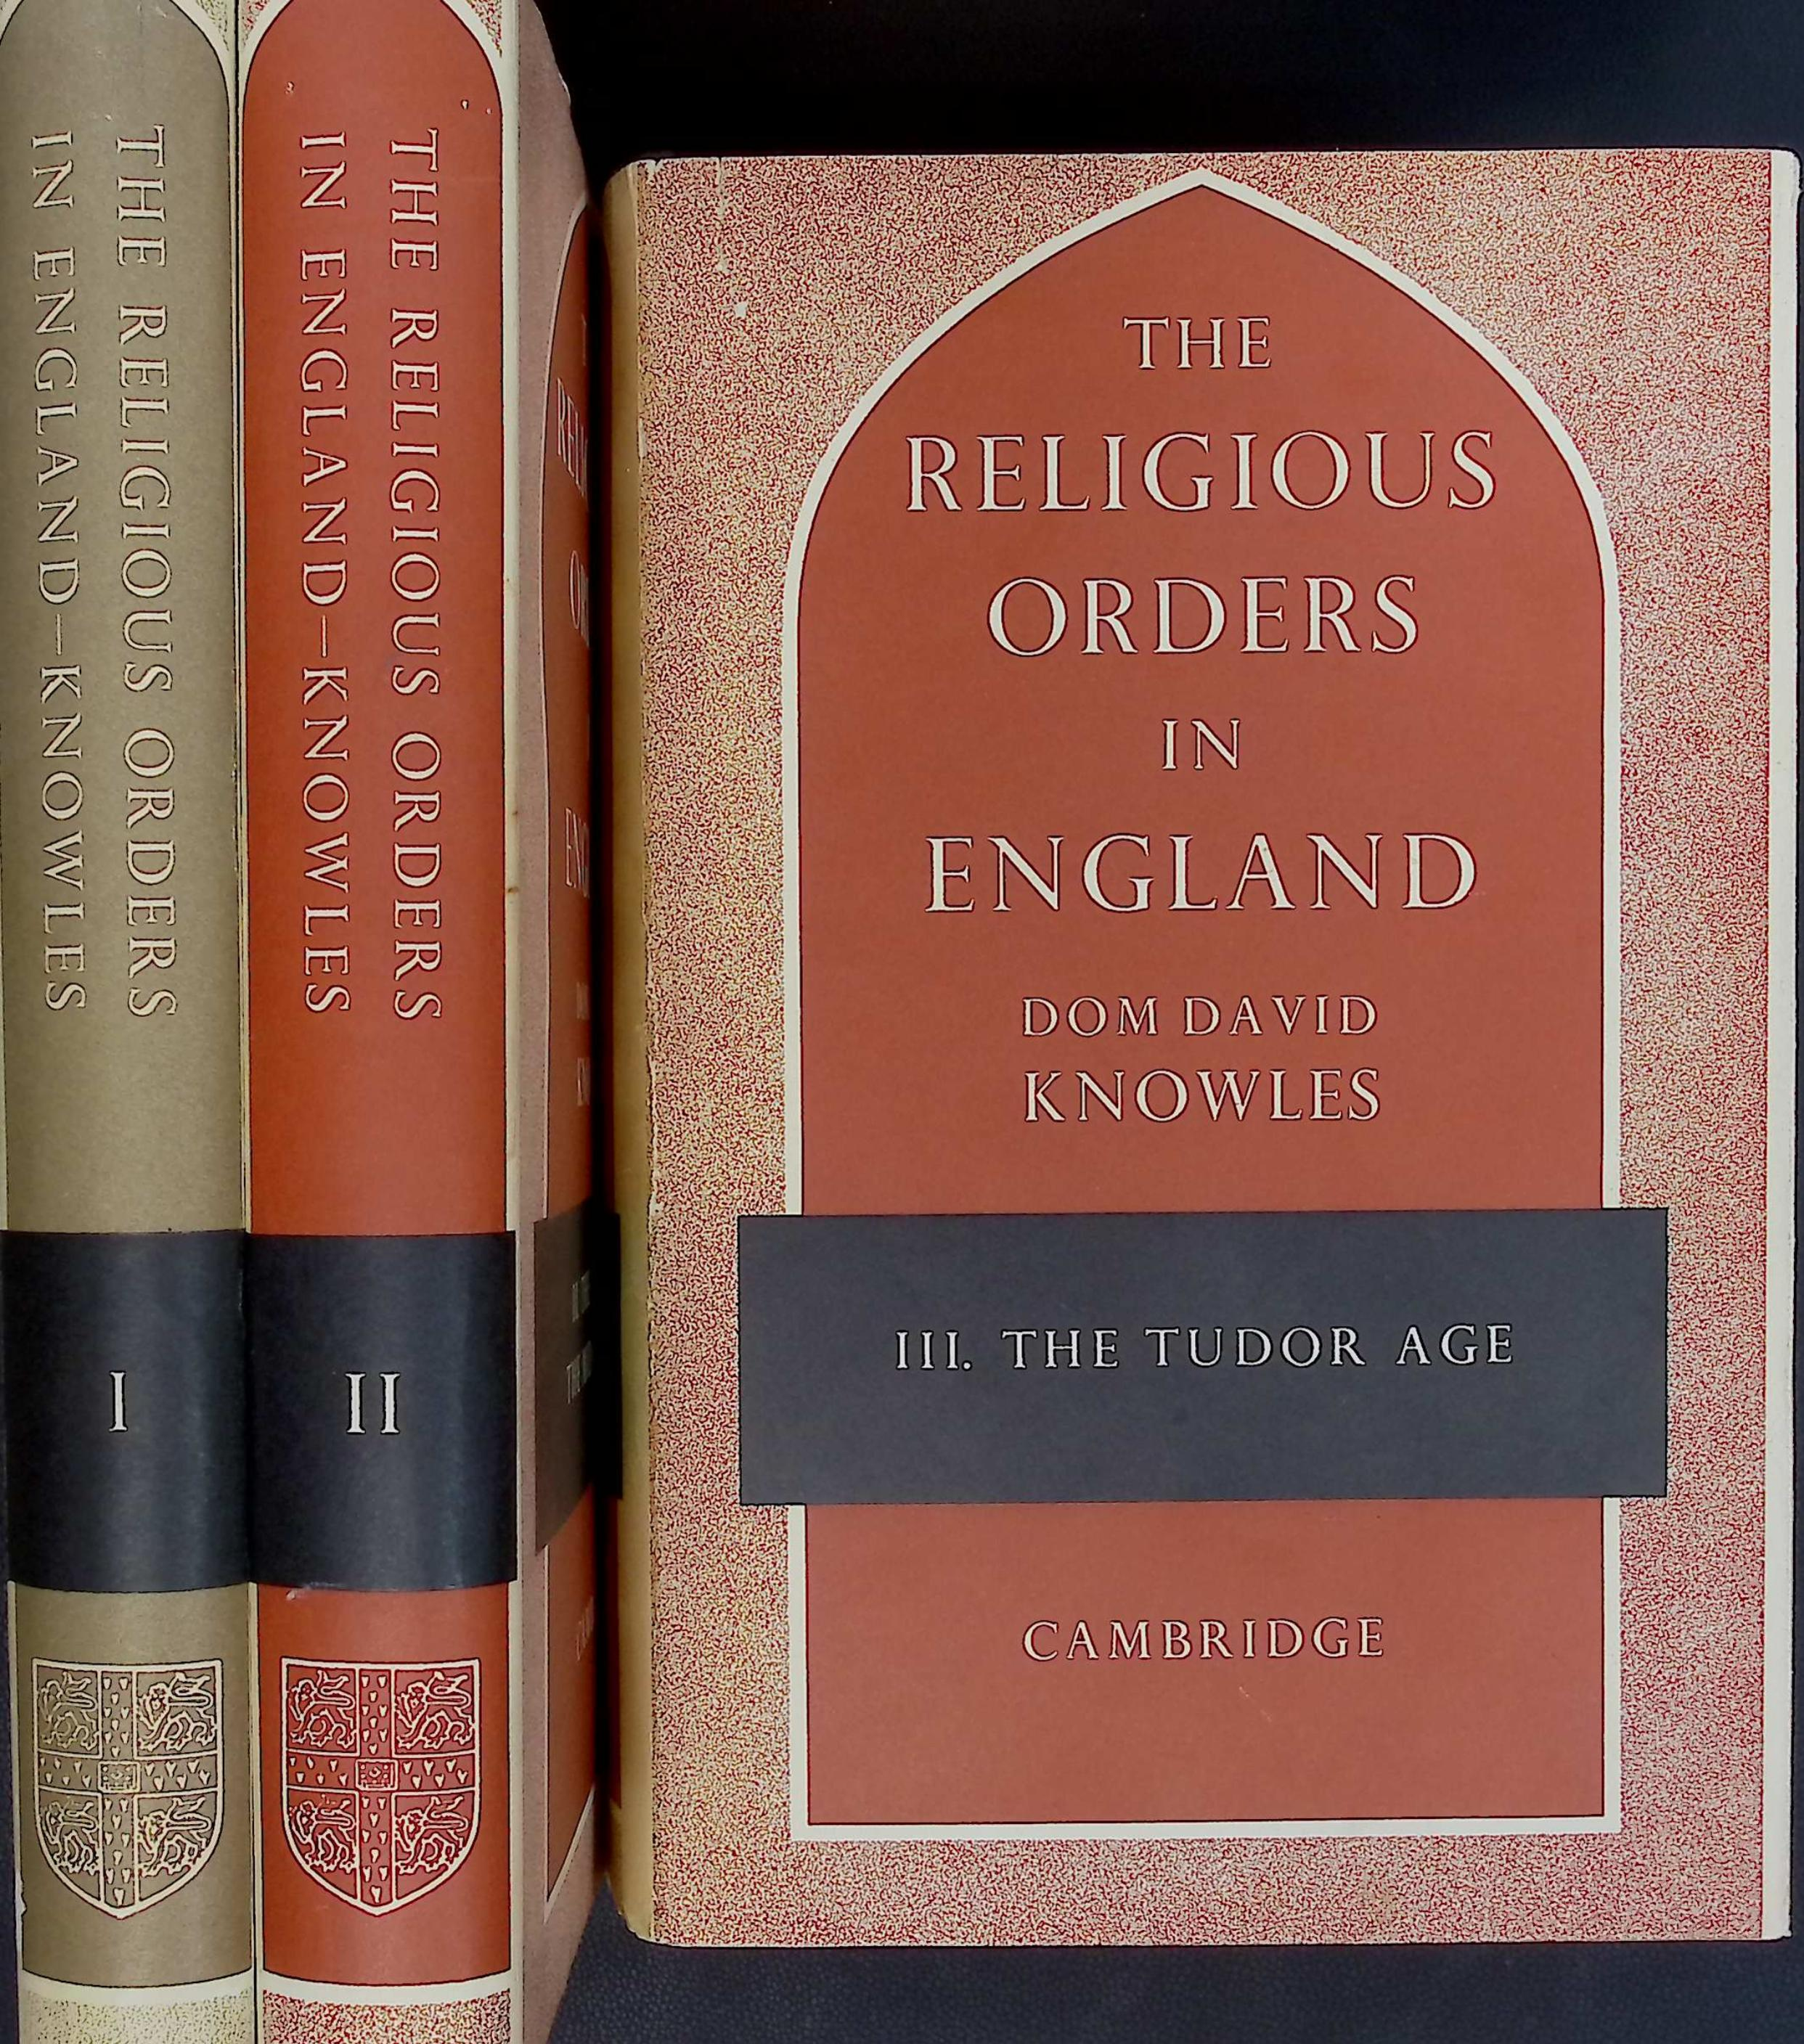 The Religious Orders in England. 3 volume set.